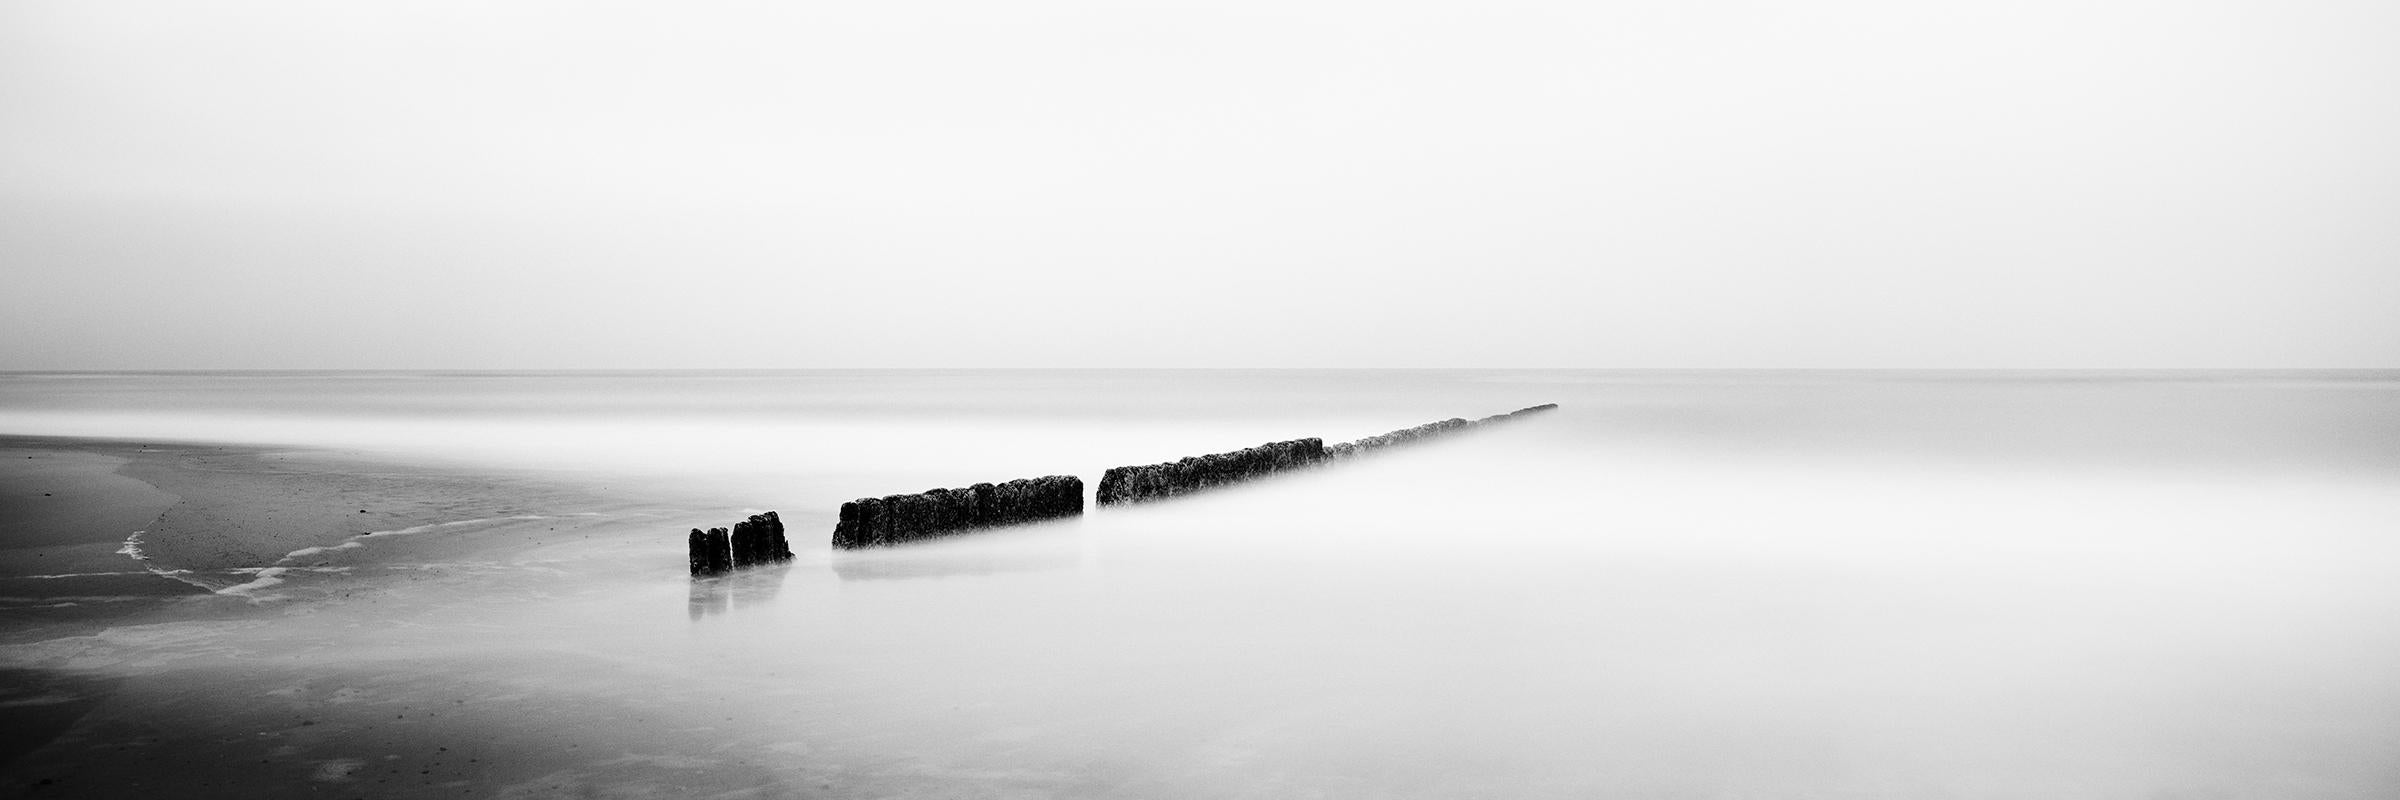 Gerald Berghammer Black and White Photograph - Brick in the Wall Groyne Sylt Germany black white fine art landscape photography